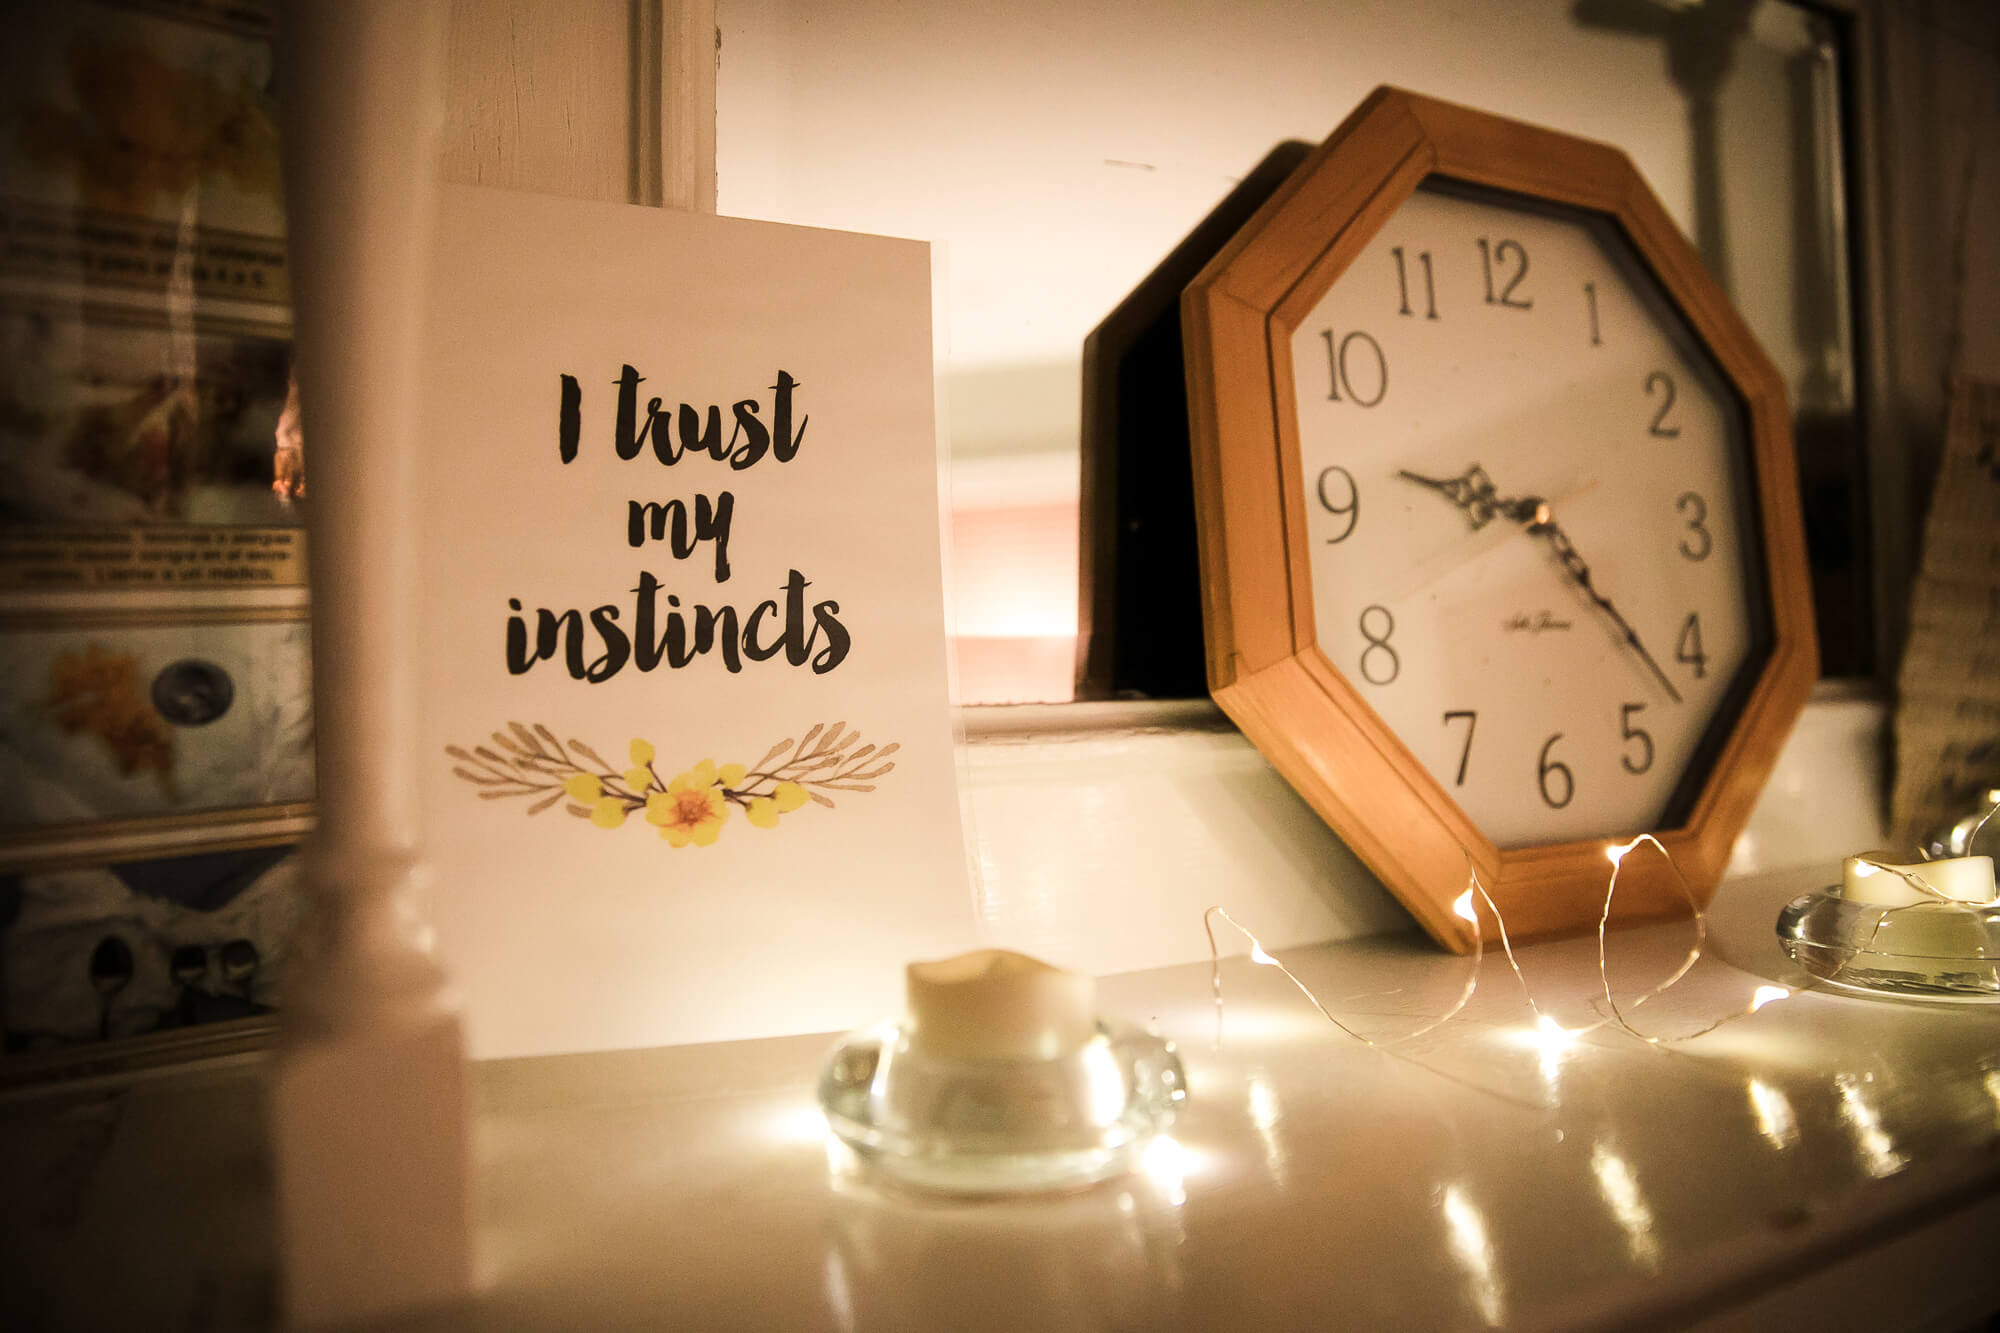 "I trust my instincts" card next to a wooden clock surrounded by white christmas lights, in a room at a Boston birthing center